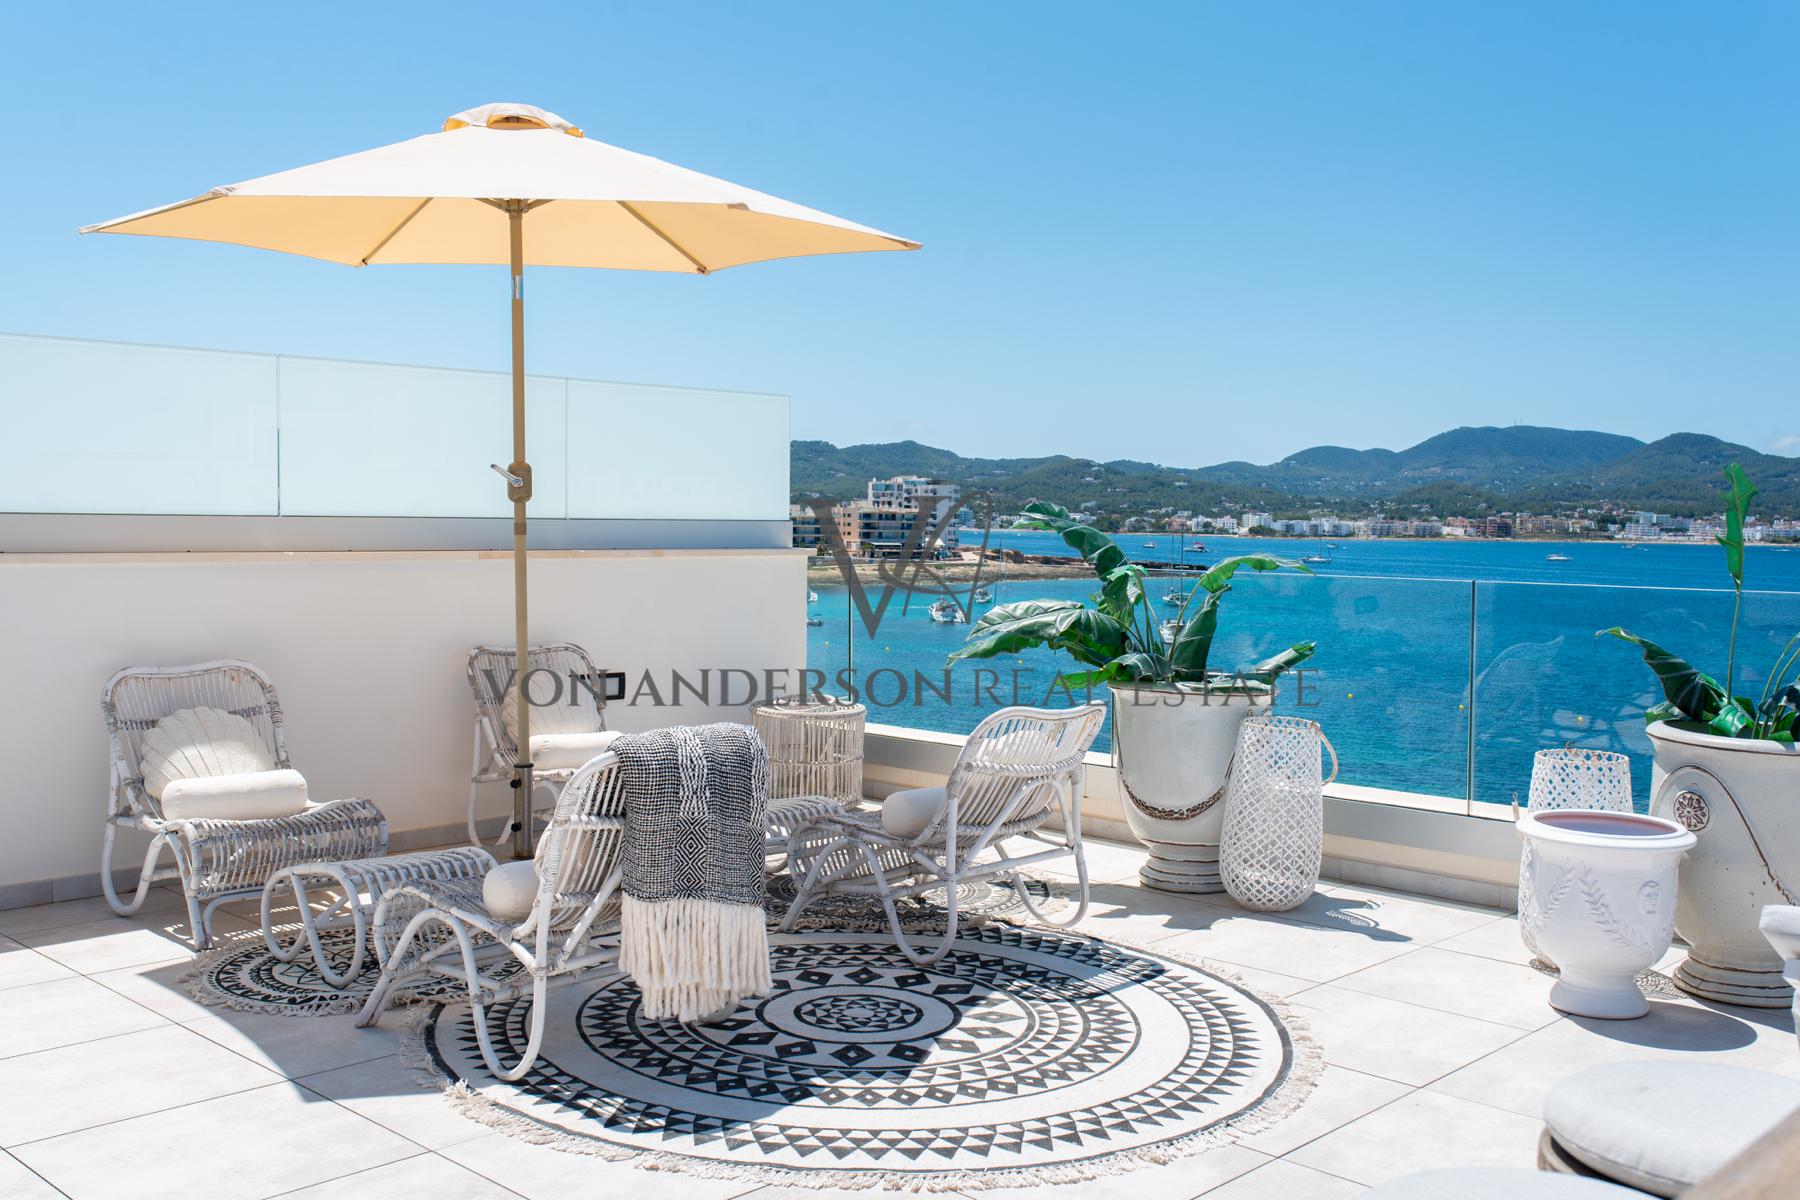 Luxurious 3-Bedroom Penthouse with Super Sea and Sunset Views, ref. VA1065, for sale in Ibiza by Von Anderson Real Estate